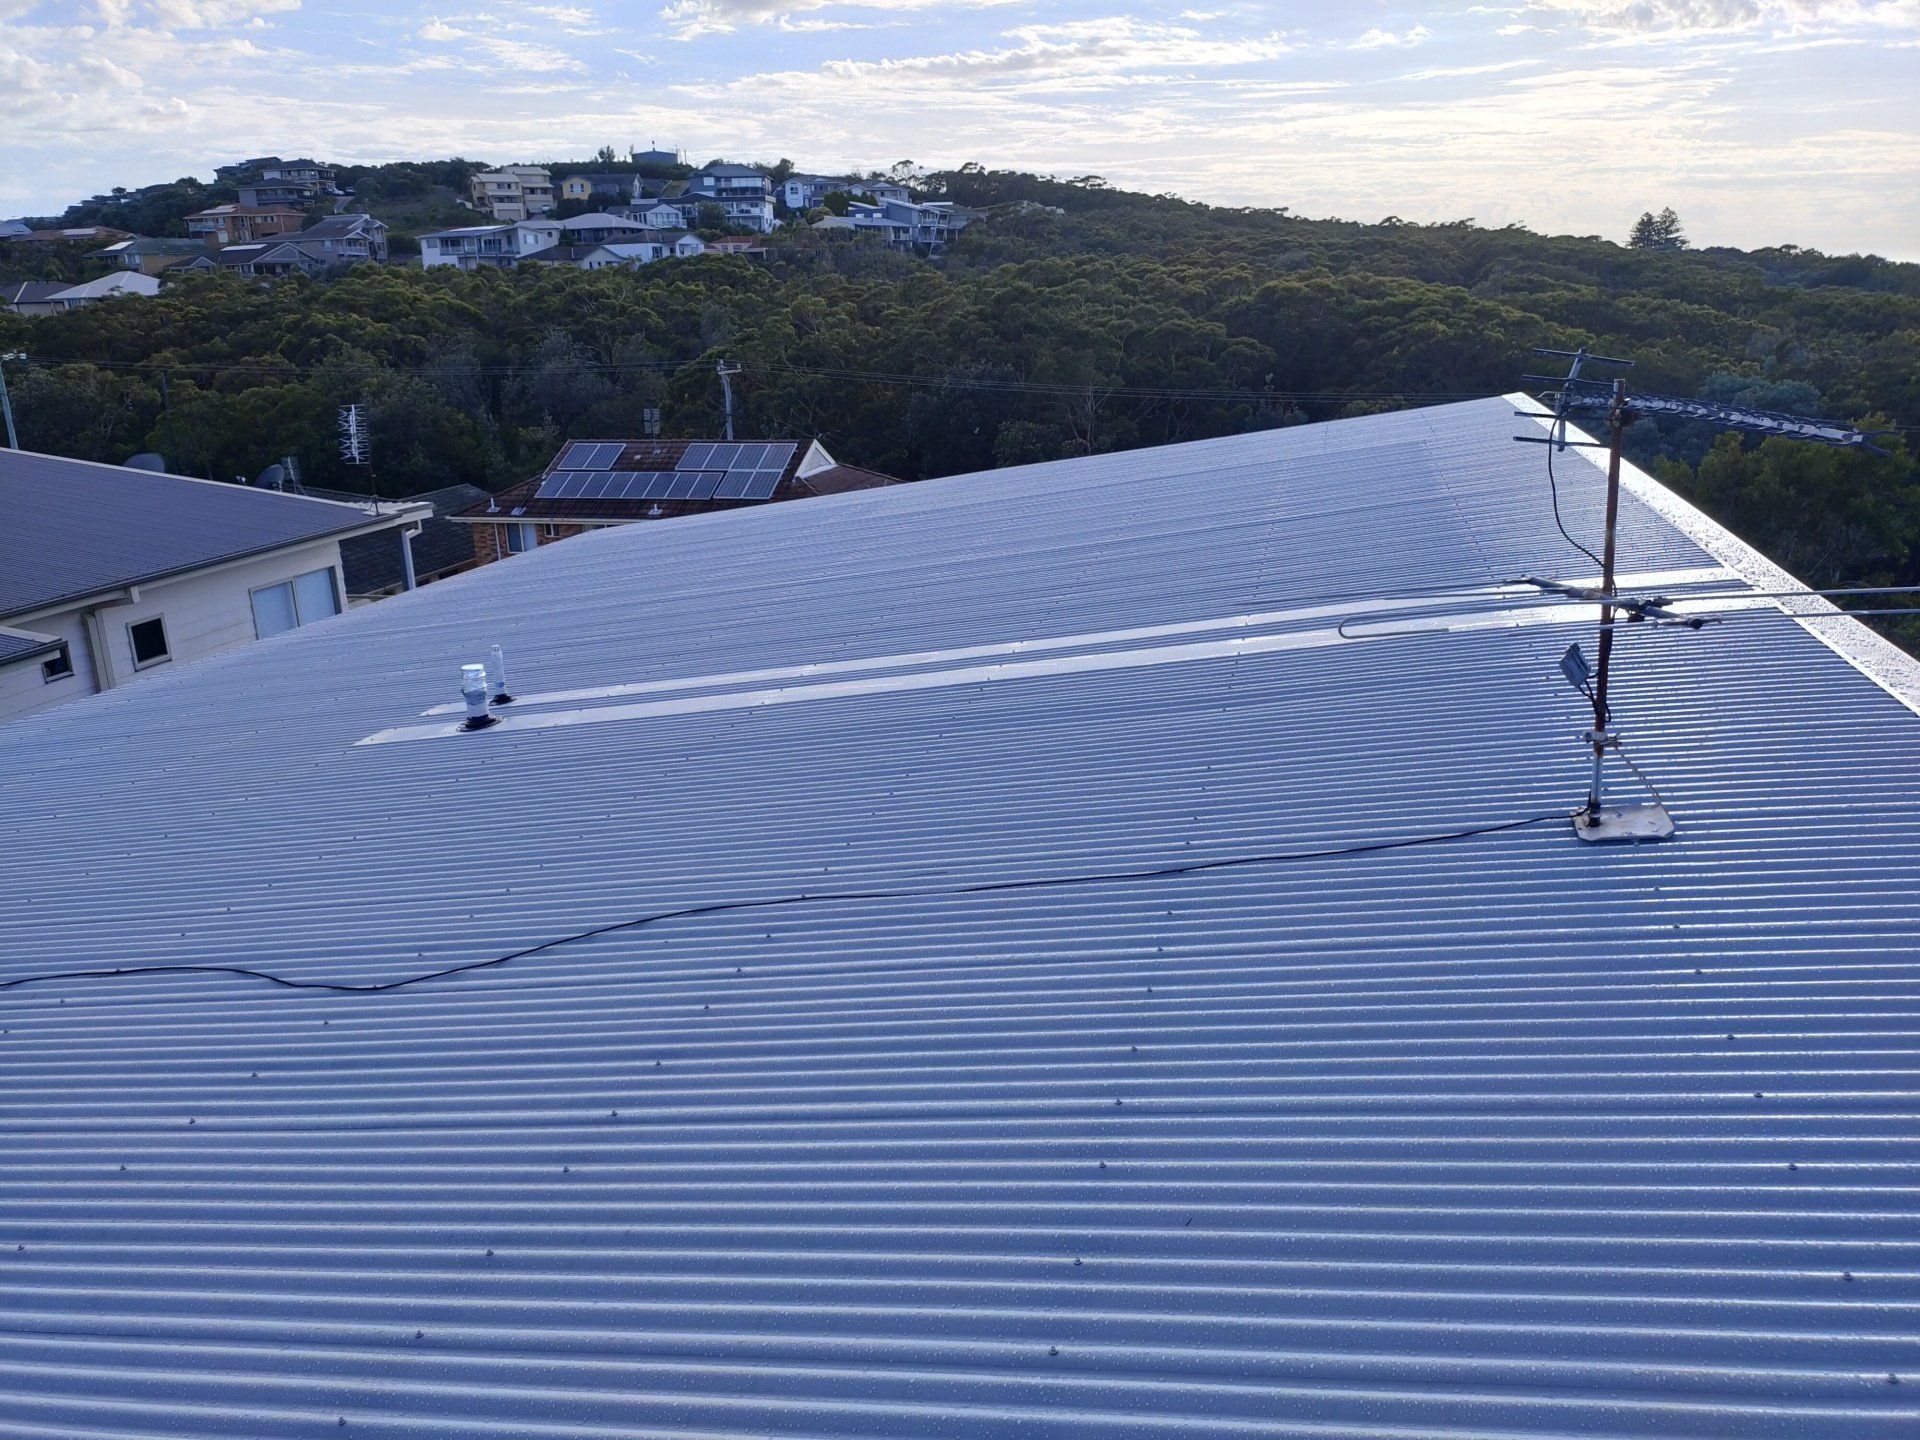 Risks of Asbestos Roofs - Roofing Specialist in Port Stephens, NSW